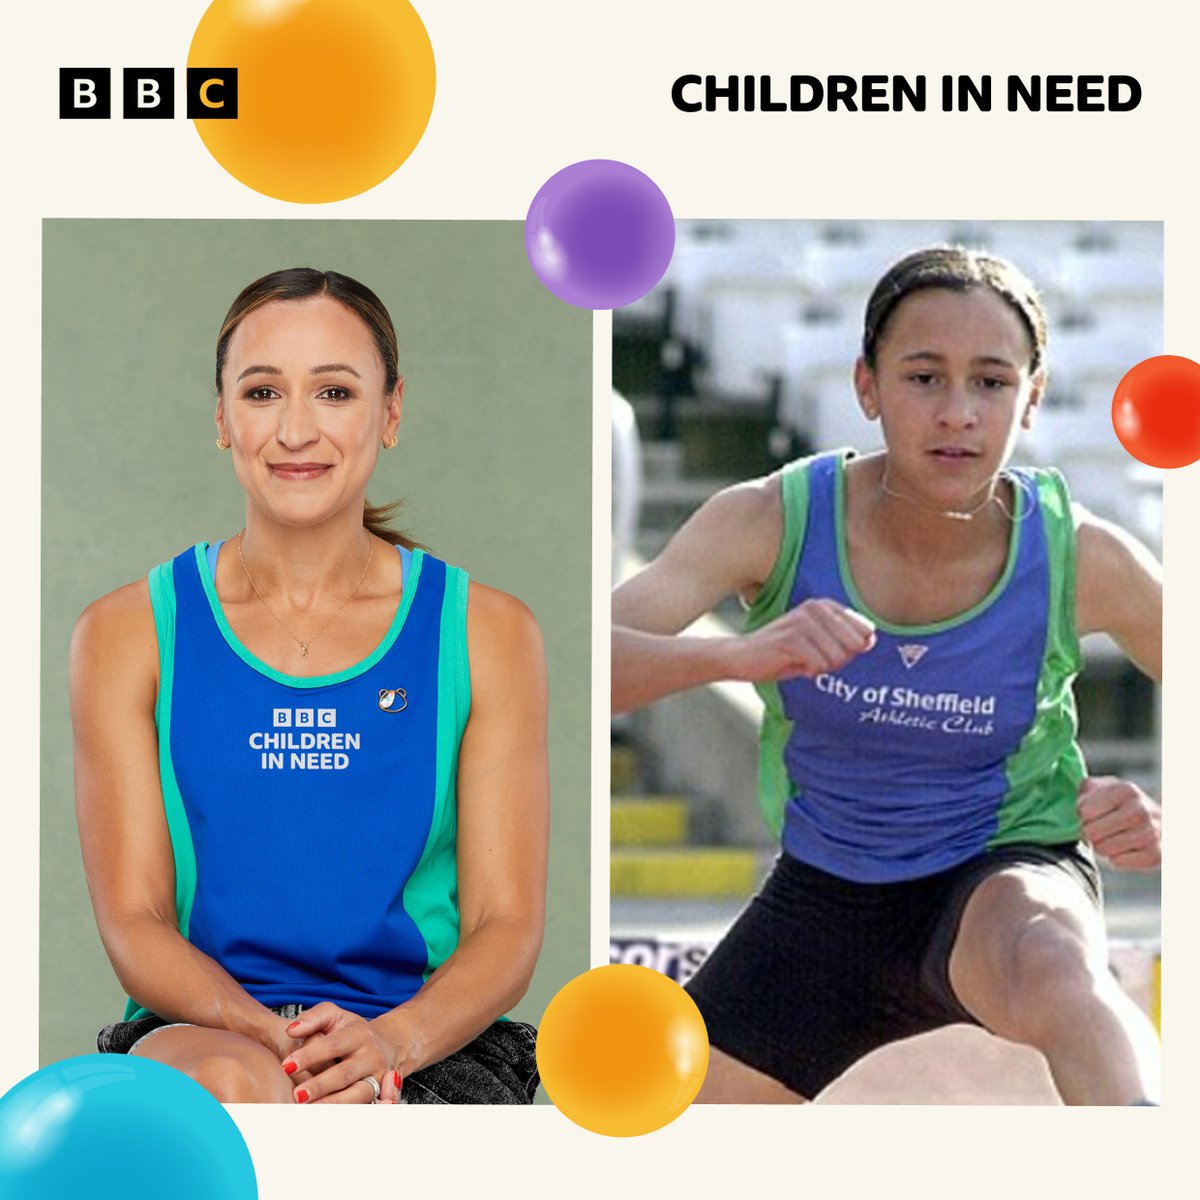 School children across the UK can get involved in some of our super exciting fundraising activity this year, helping to change young lives up and down the country. The Pudsey Bearpee Challenge is a great way to start! Head to bbc.co.uk/cin to find out more